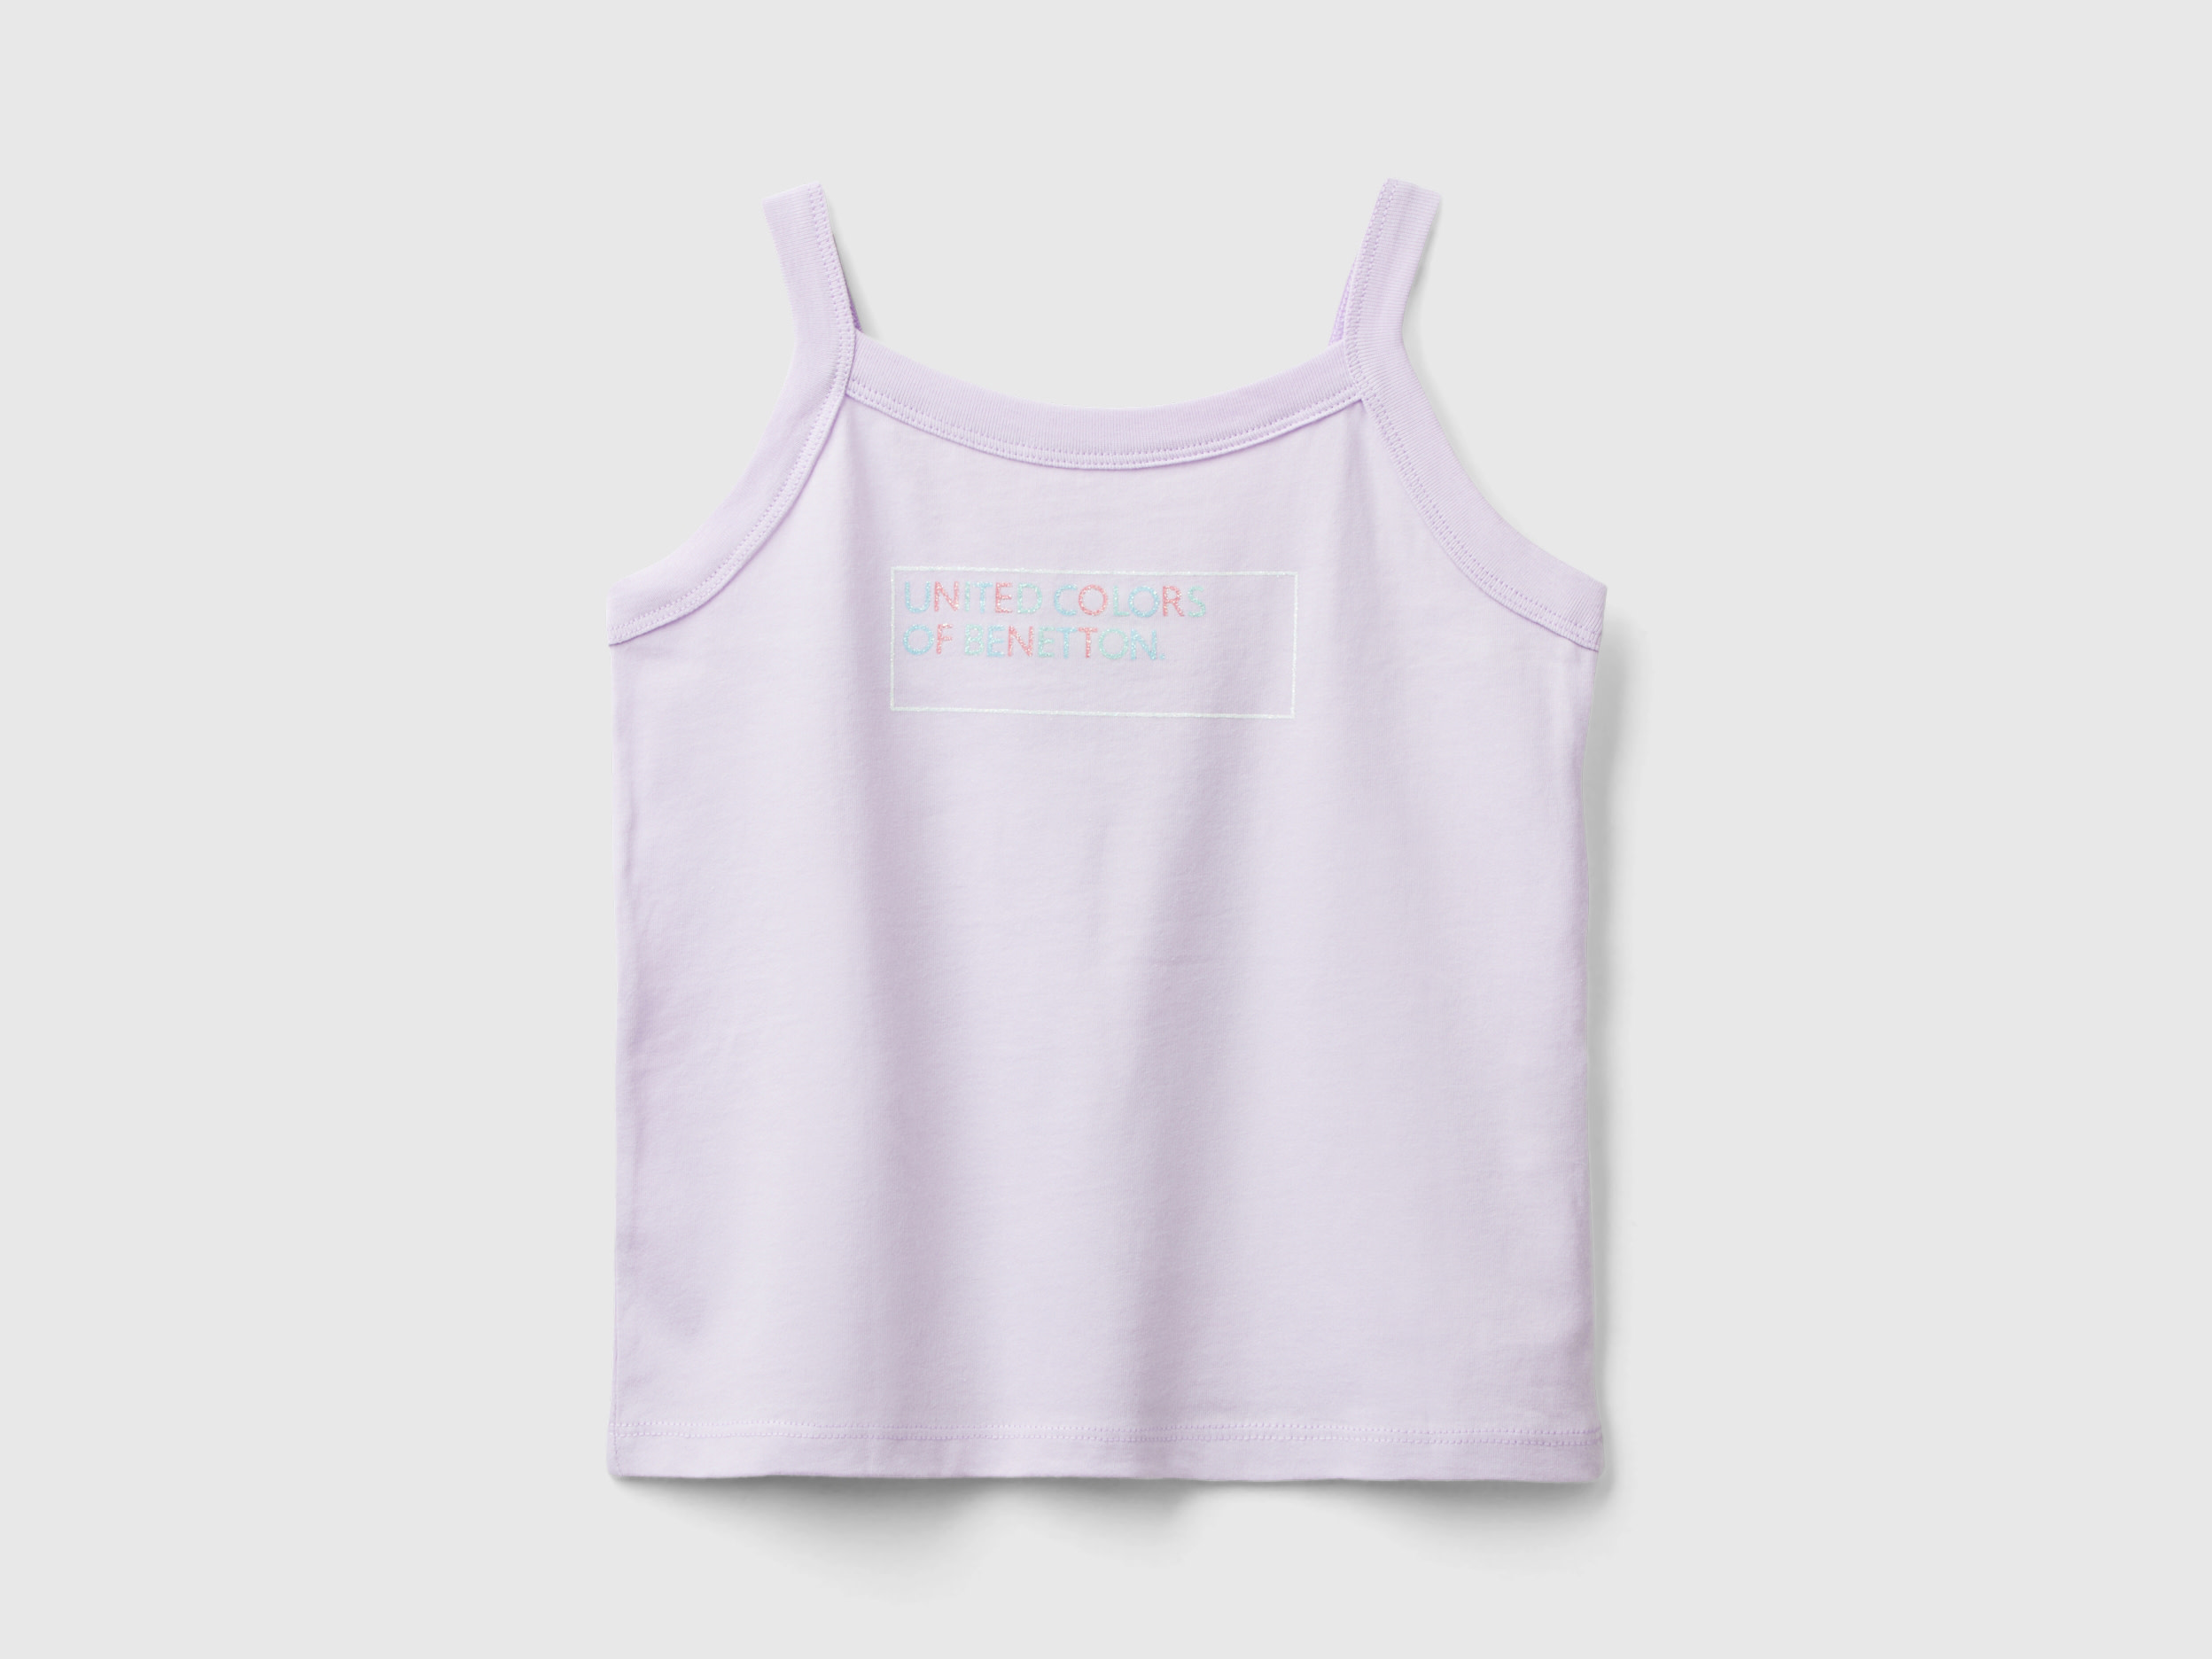 Image of Benetton, Tank Top With Glittery Logo Print, size 3XL, Lilac, Kids